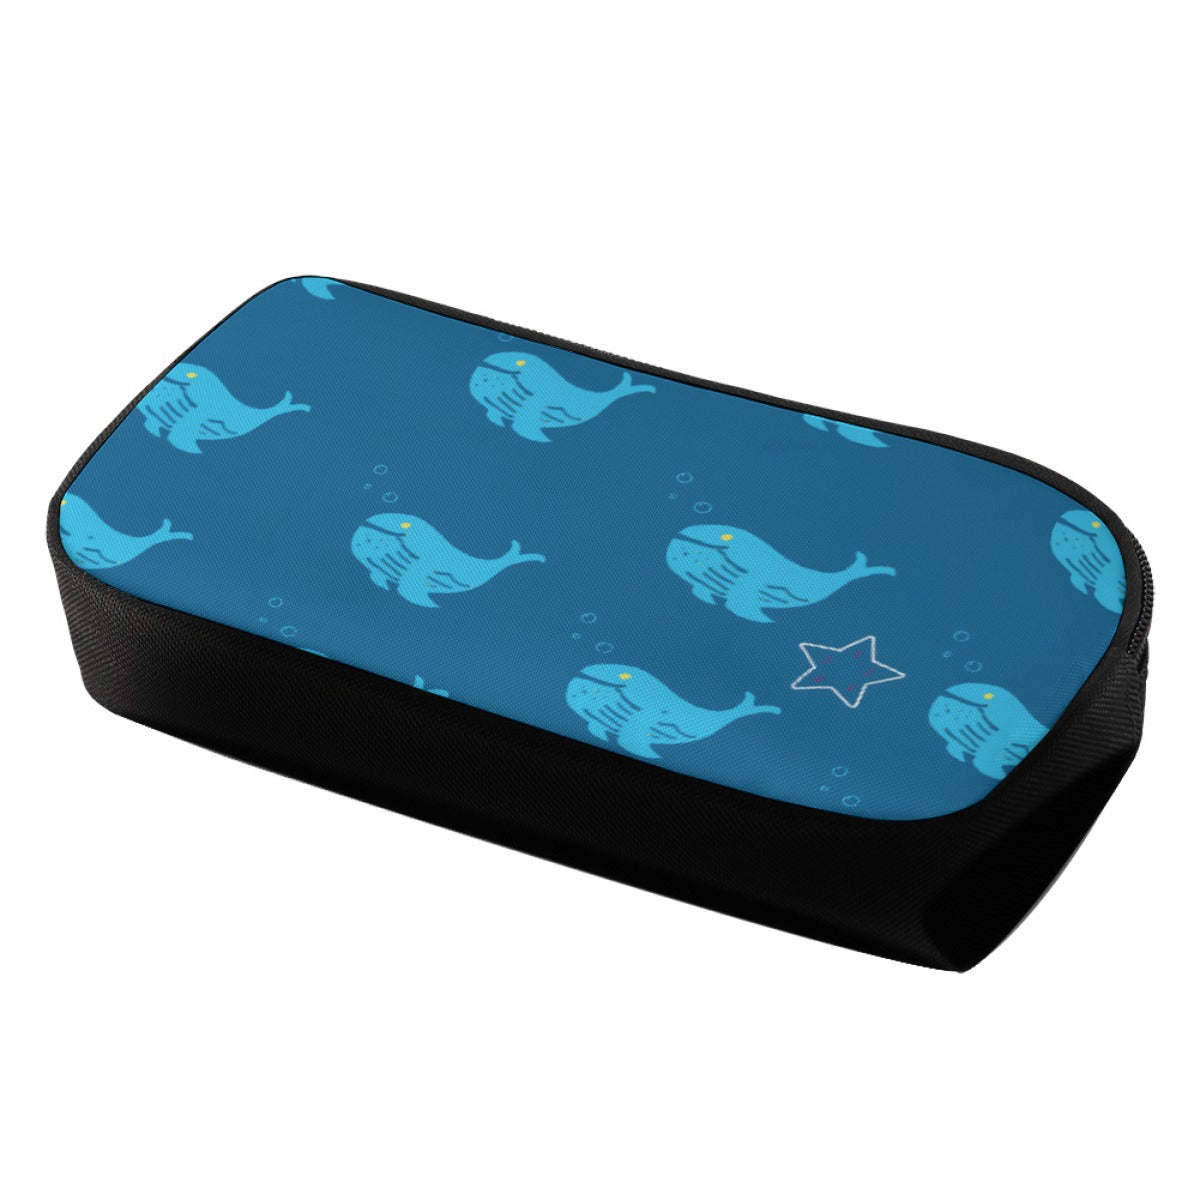 Whale Pencil Bag with Star